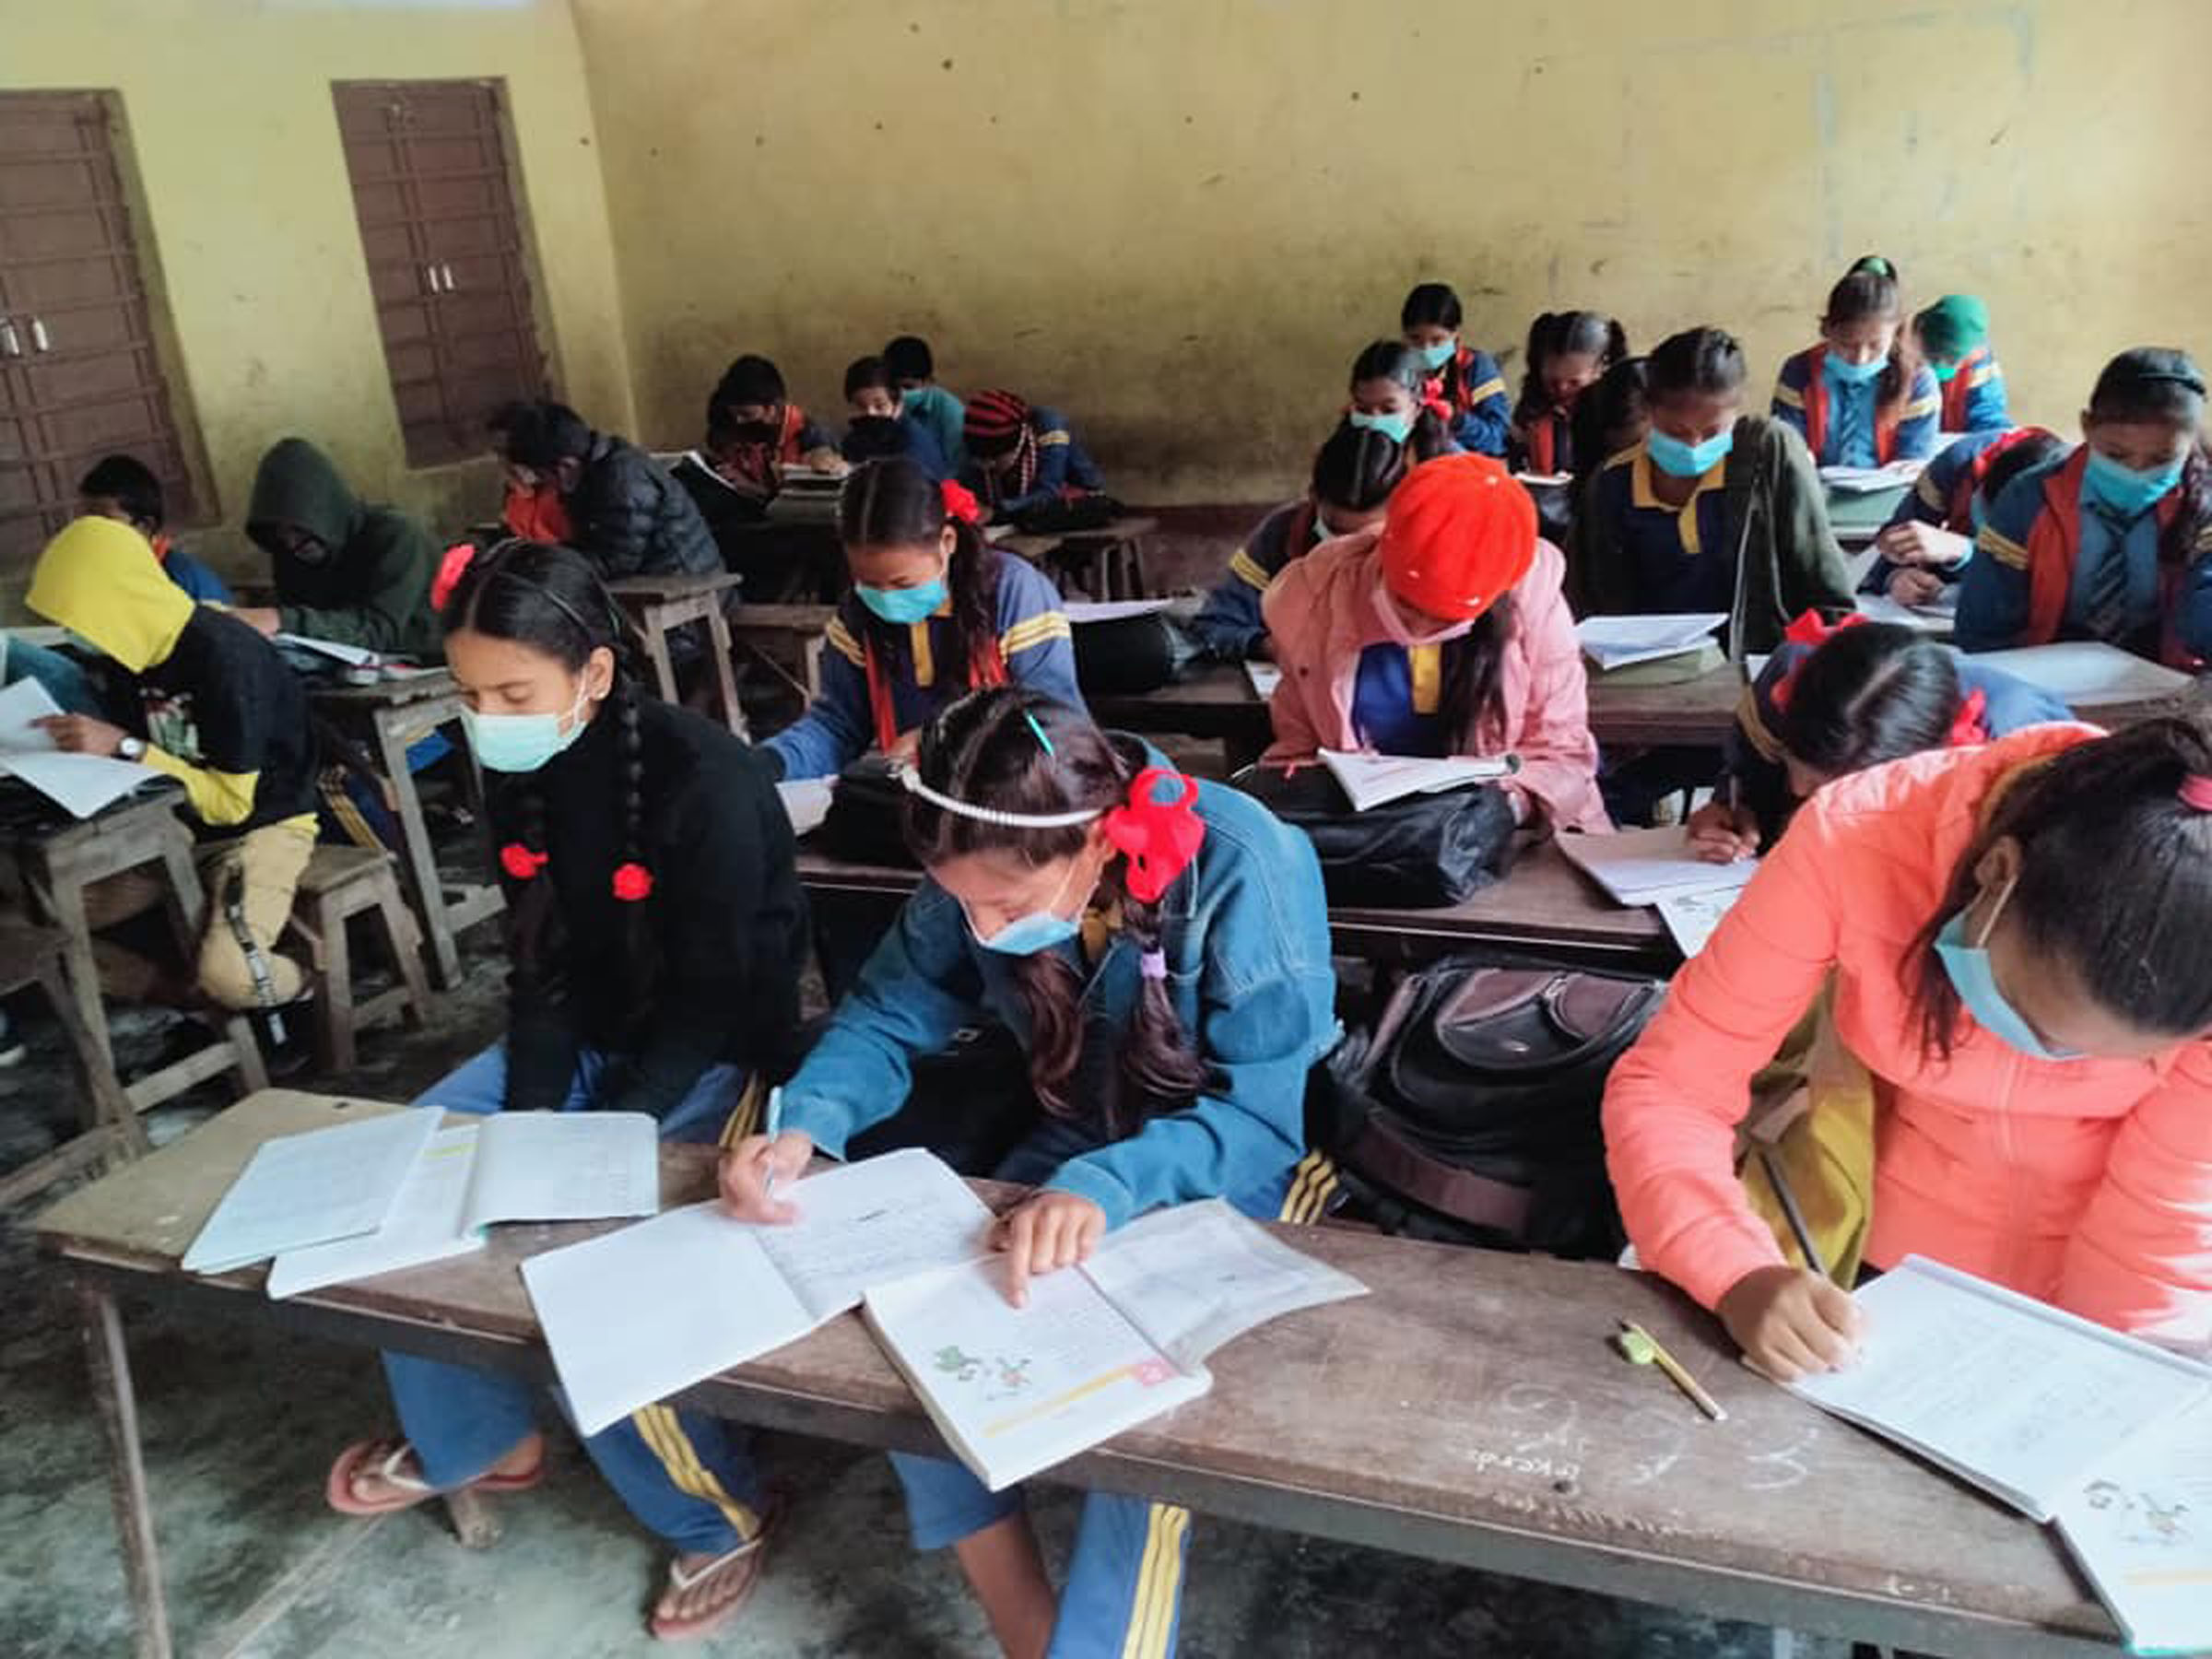 Schools resume in Kathmandu without KMC’s permission